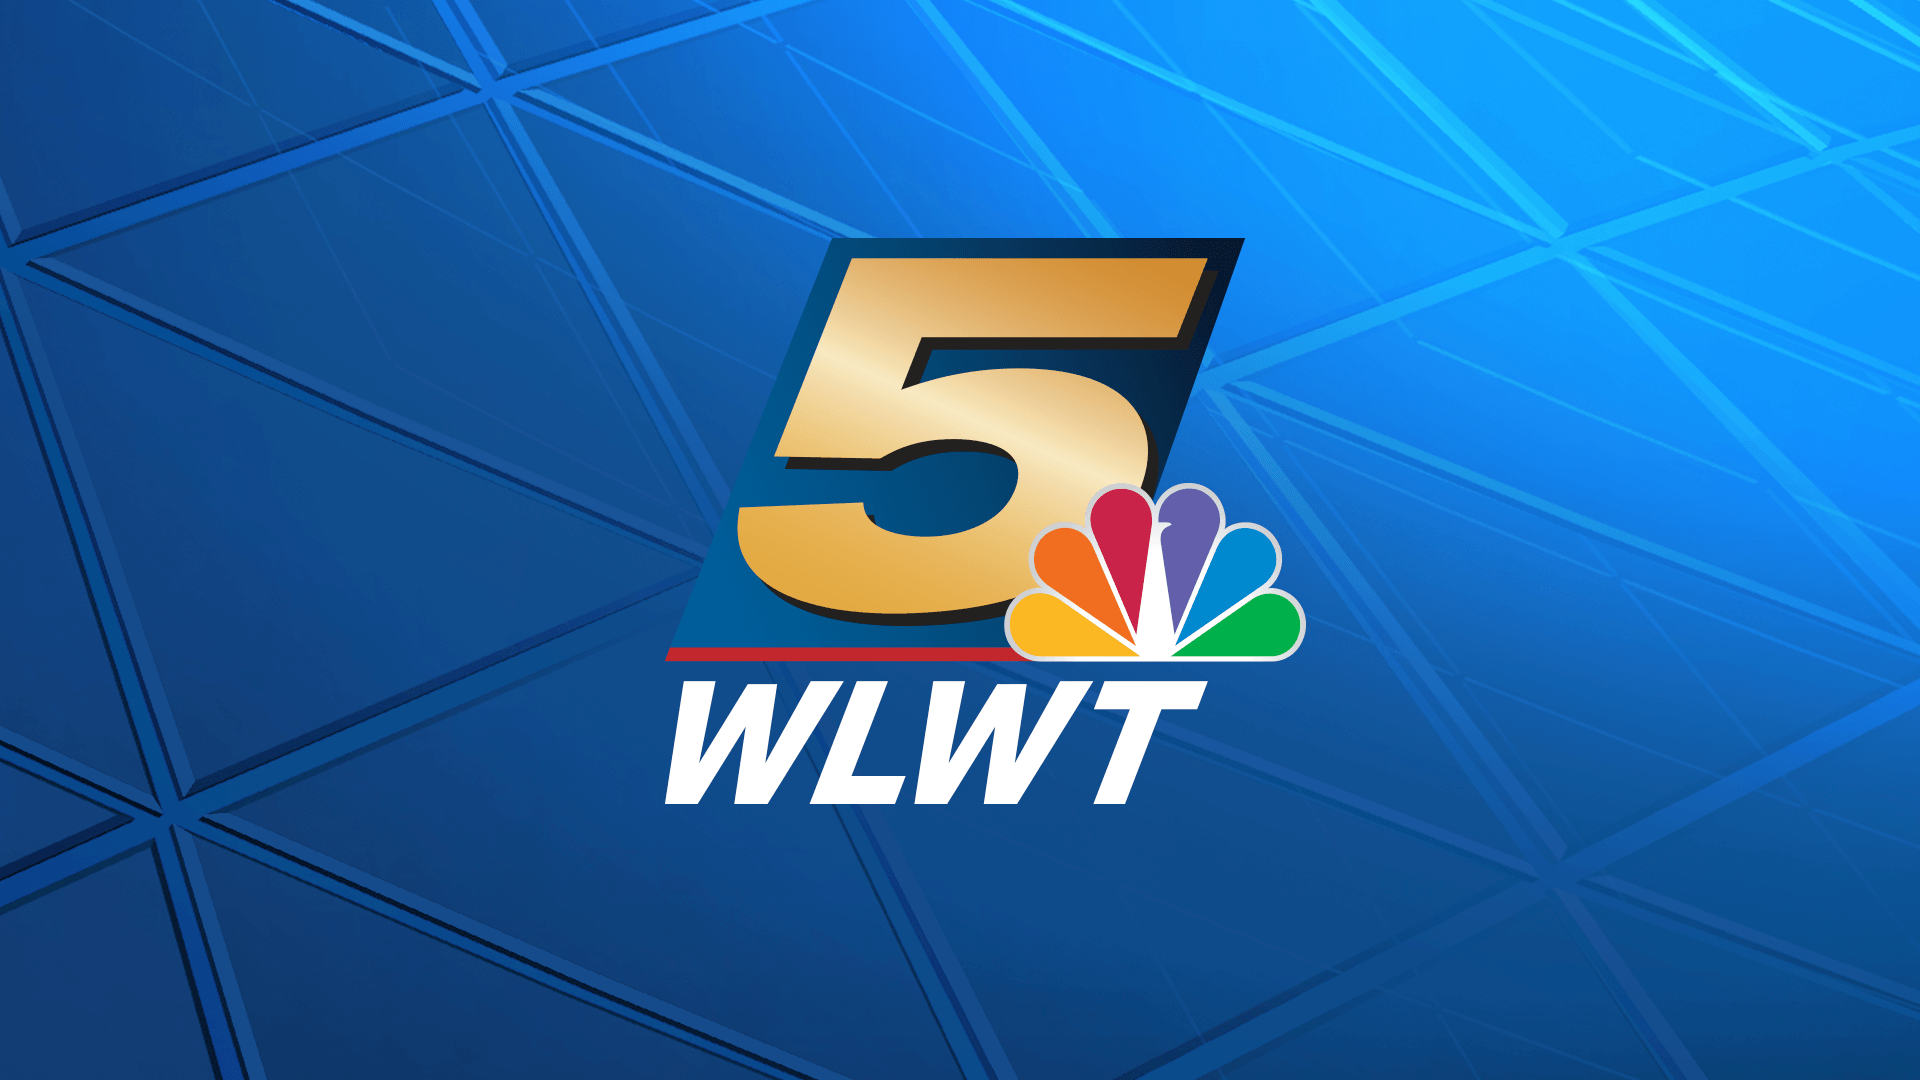 WLWT Logo - Amazon.com: WLWT Cincinnati news, weather: Appstore for Android